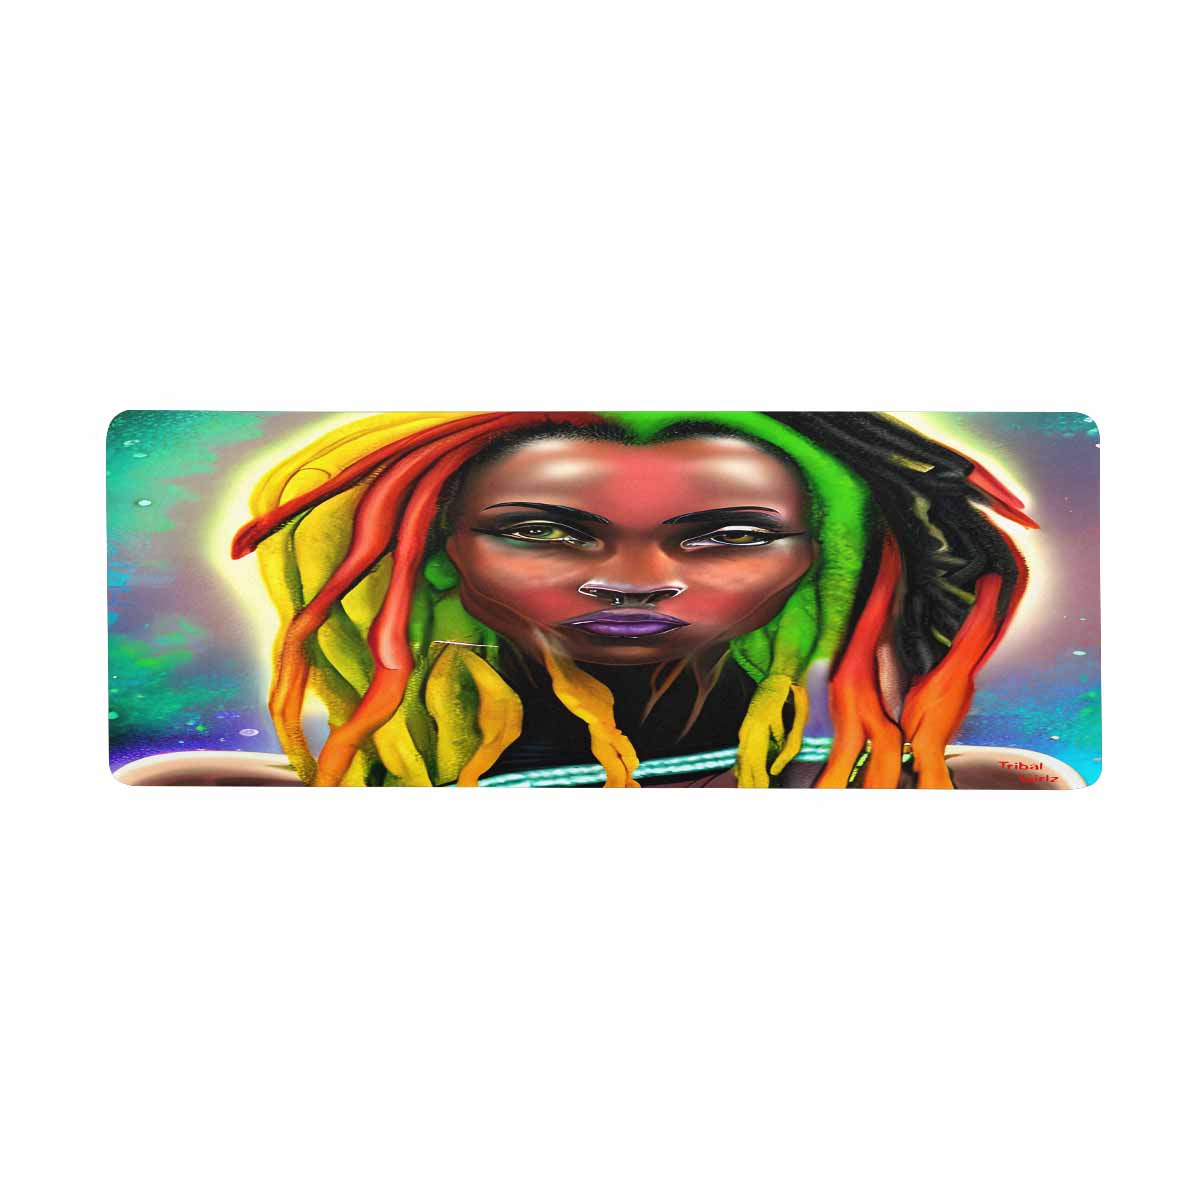 Dreads & Braids, 31 x 12 in large mouse pad, Fulangiara 25